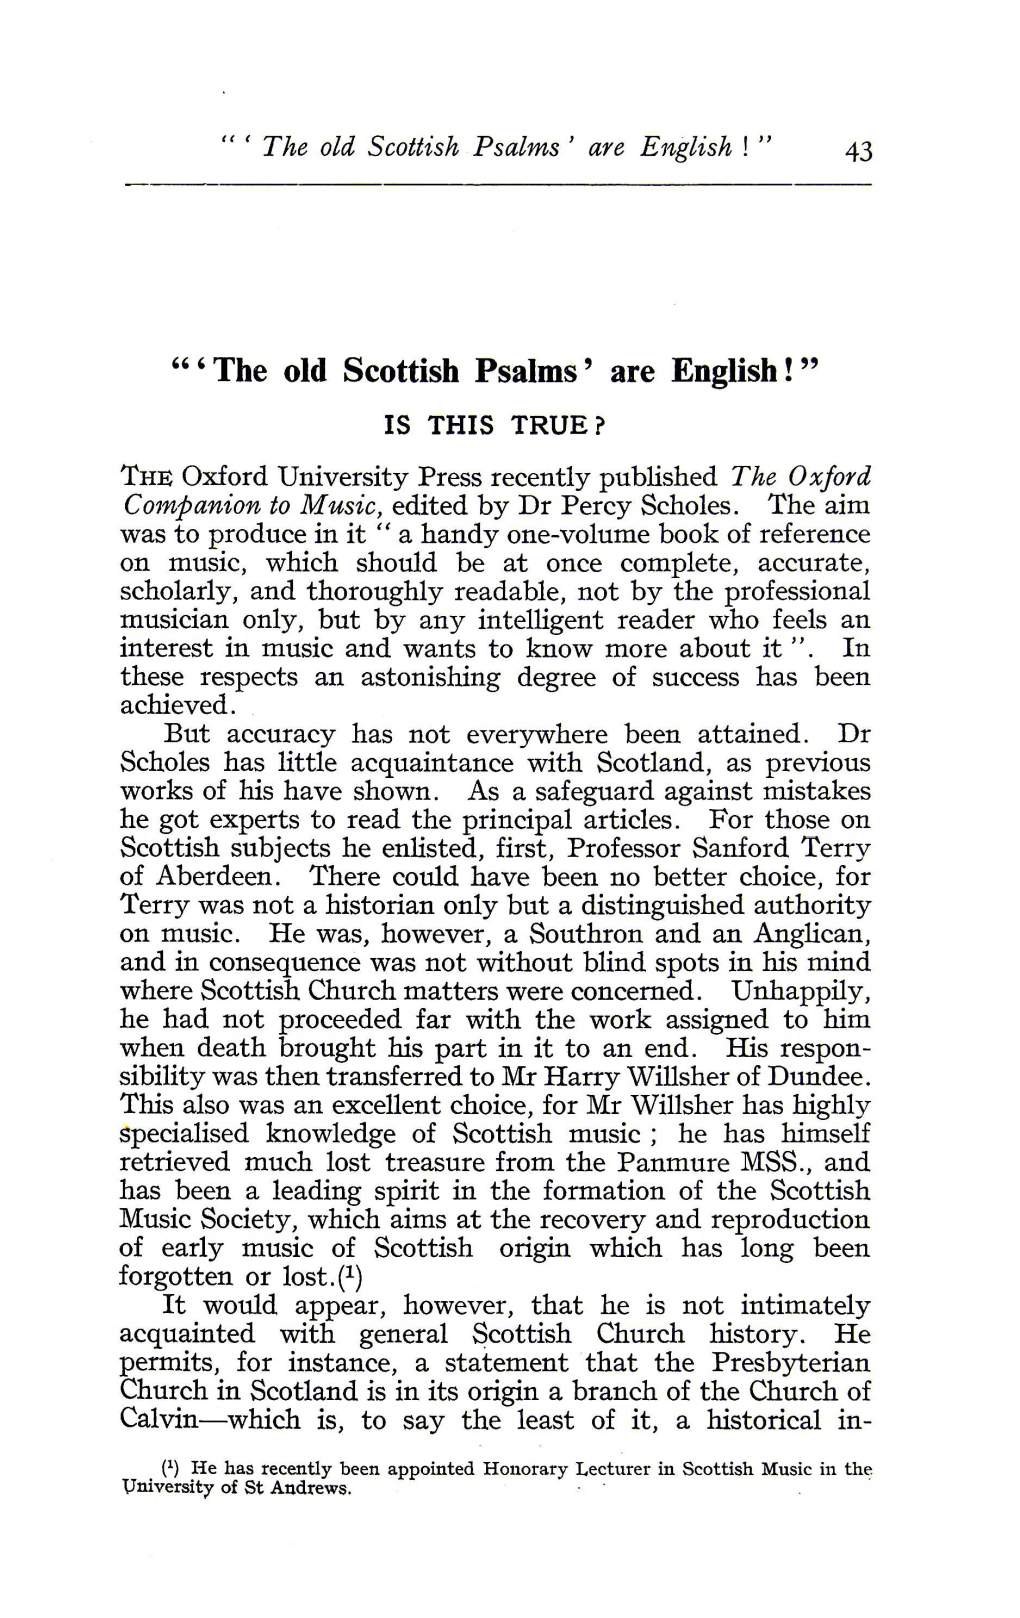 " ' the Old Scottish Psalms' Are English ! " IS THIS TRUE ? the Oxford University Press Recently Published the Oxford Companion to Music, Edited by Dr Percy Scholes